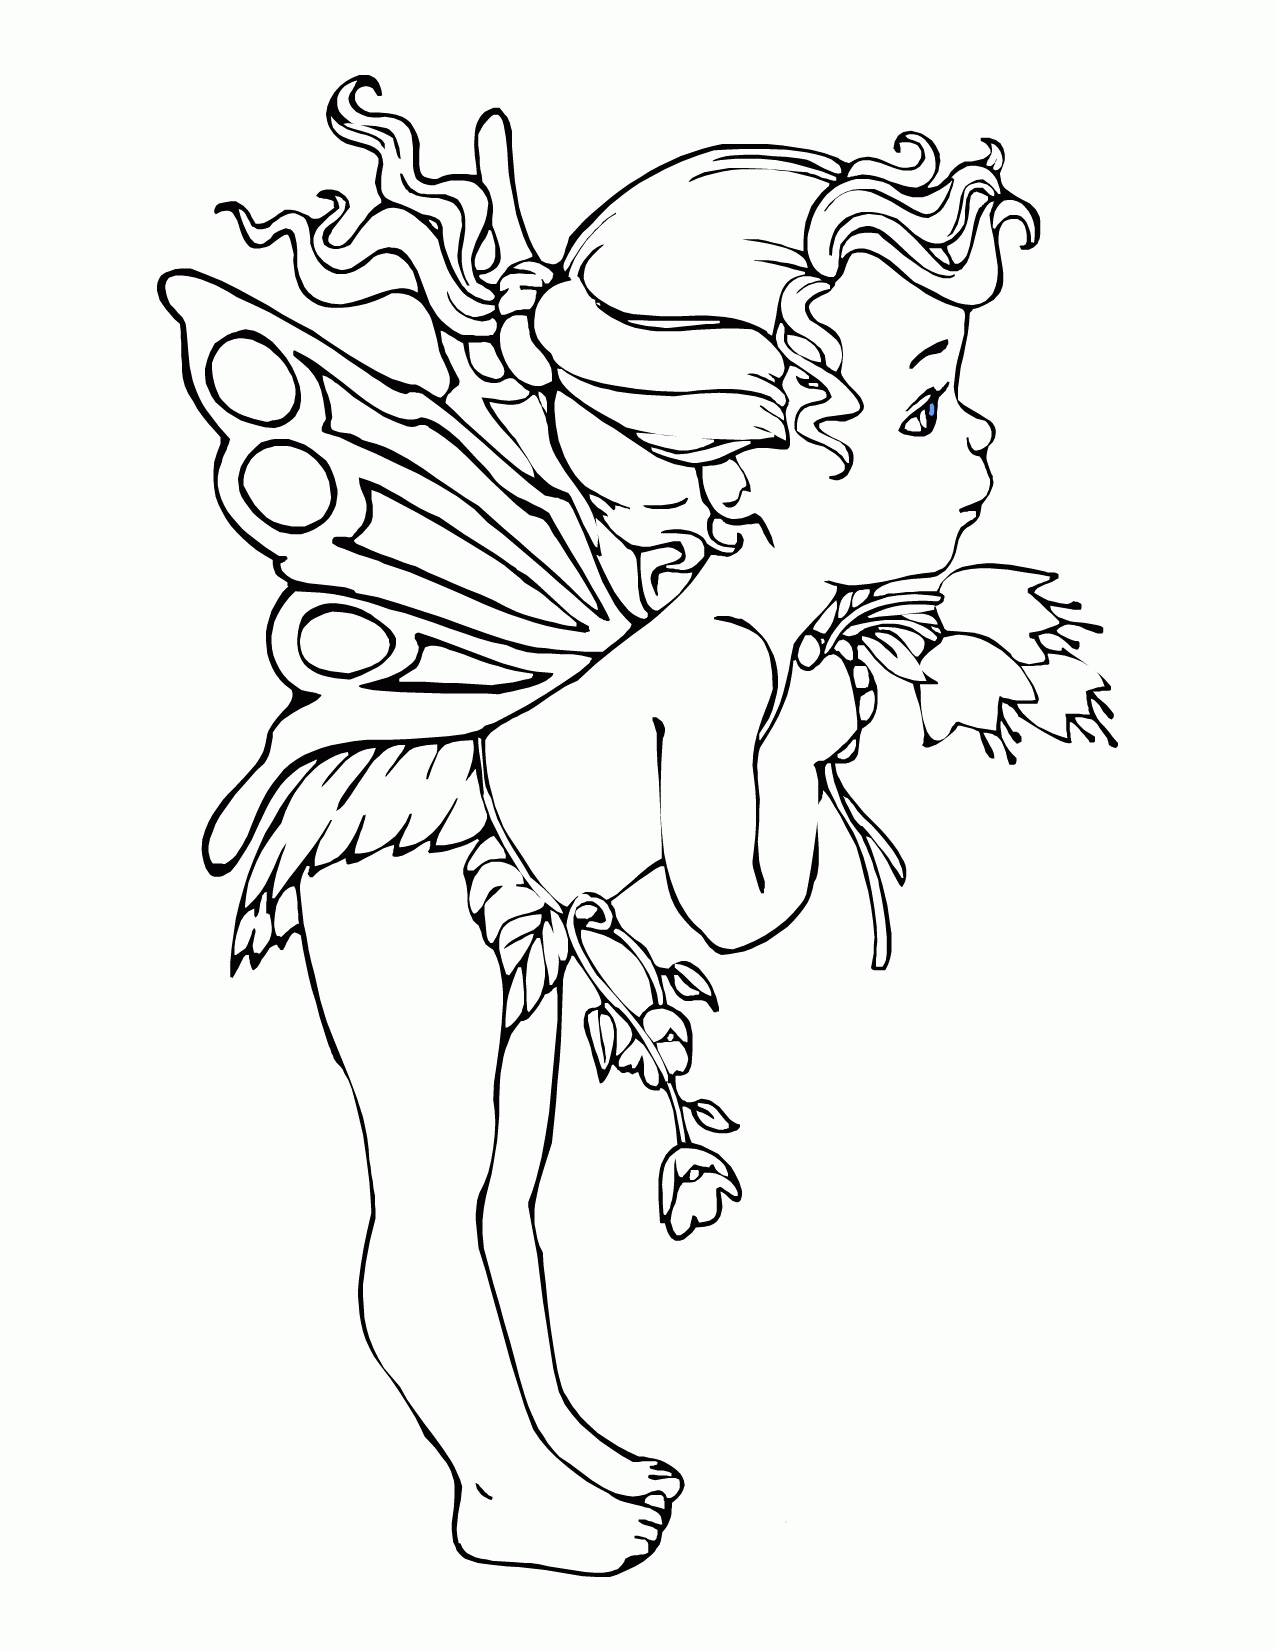 Tooth Fairy For Kids - Coloring Pages For Kids And For Adults - Free Printable Coloring Pages Fairies Adults